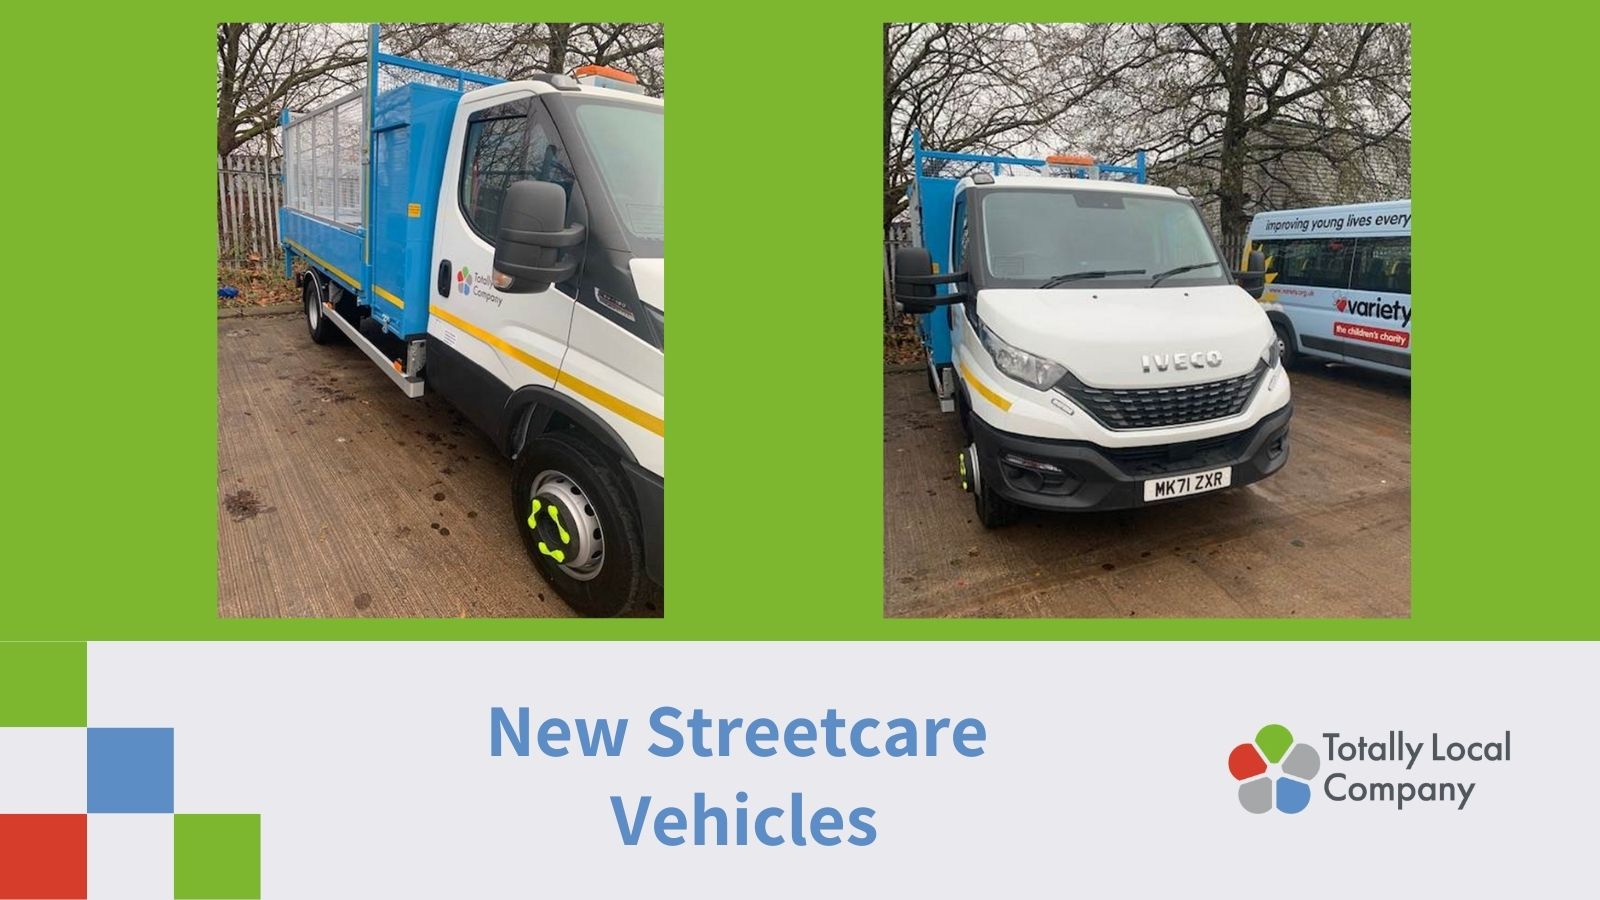 wording - new streetcare vehicles, with a photo of both vehicles